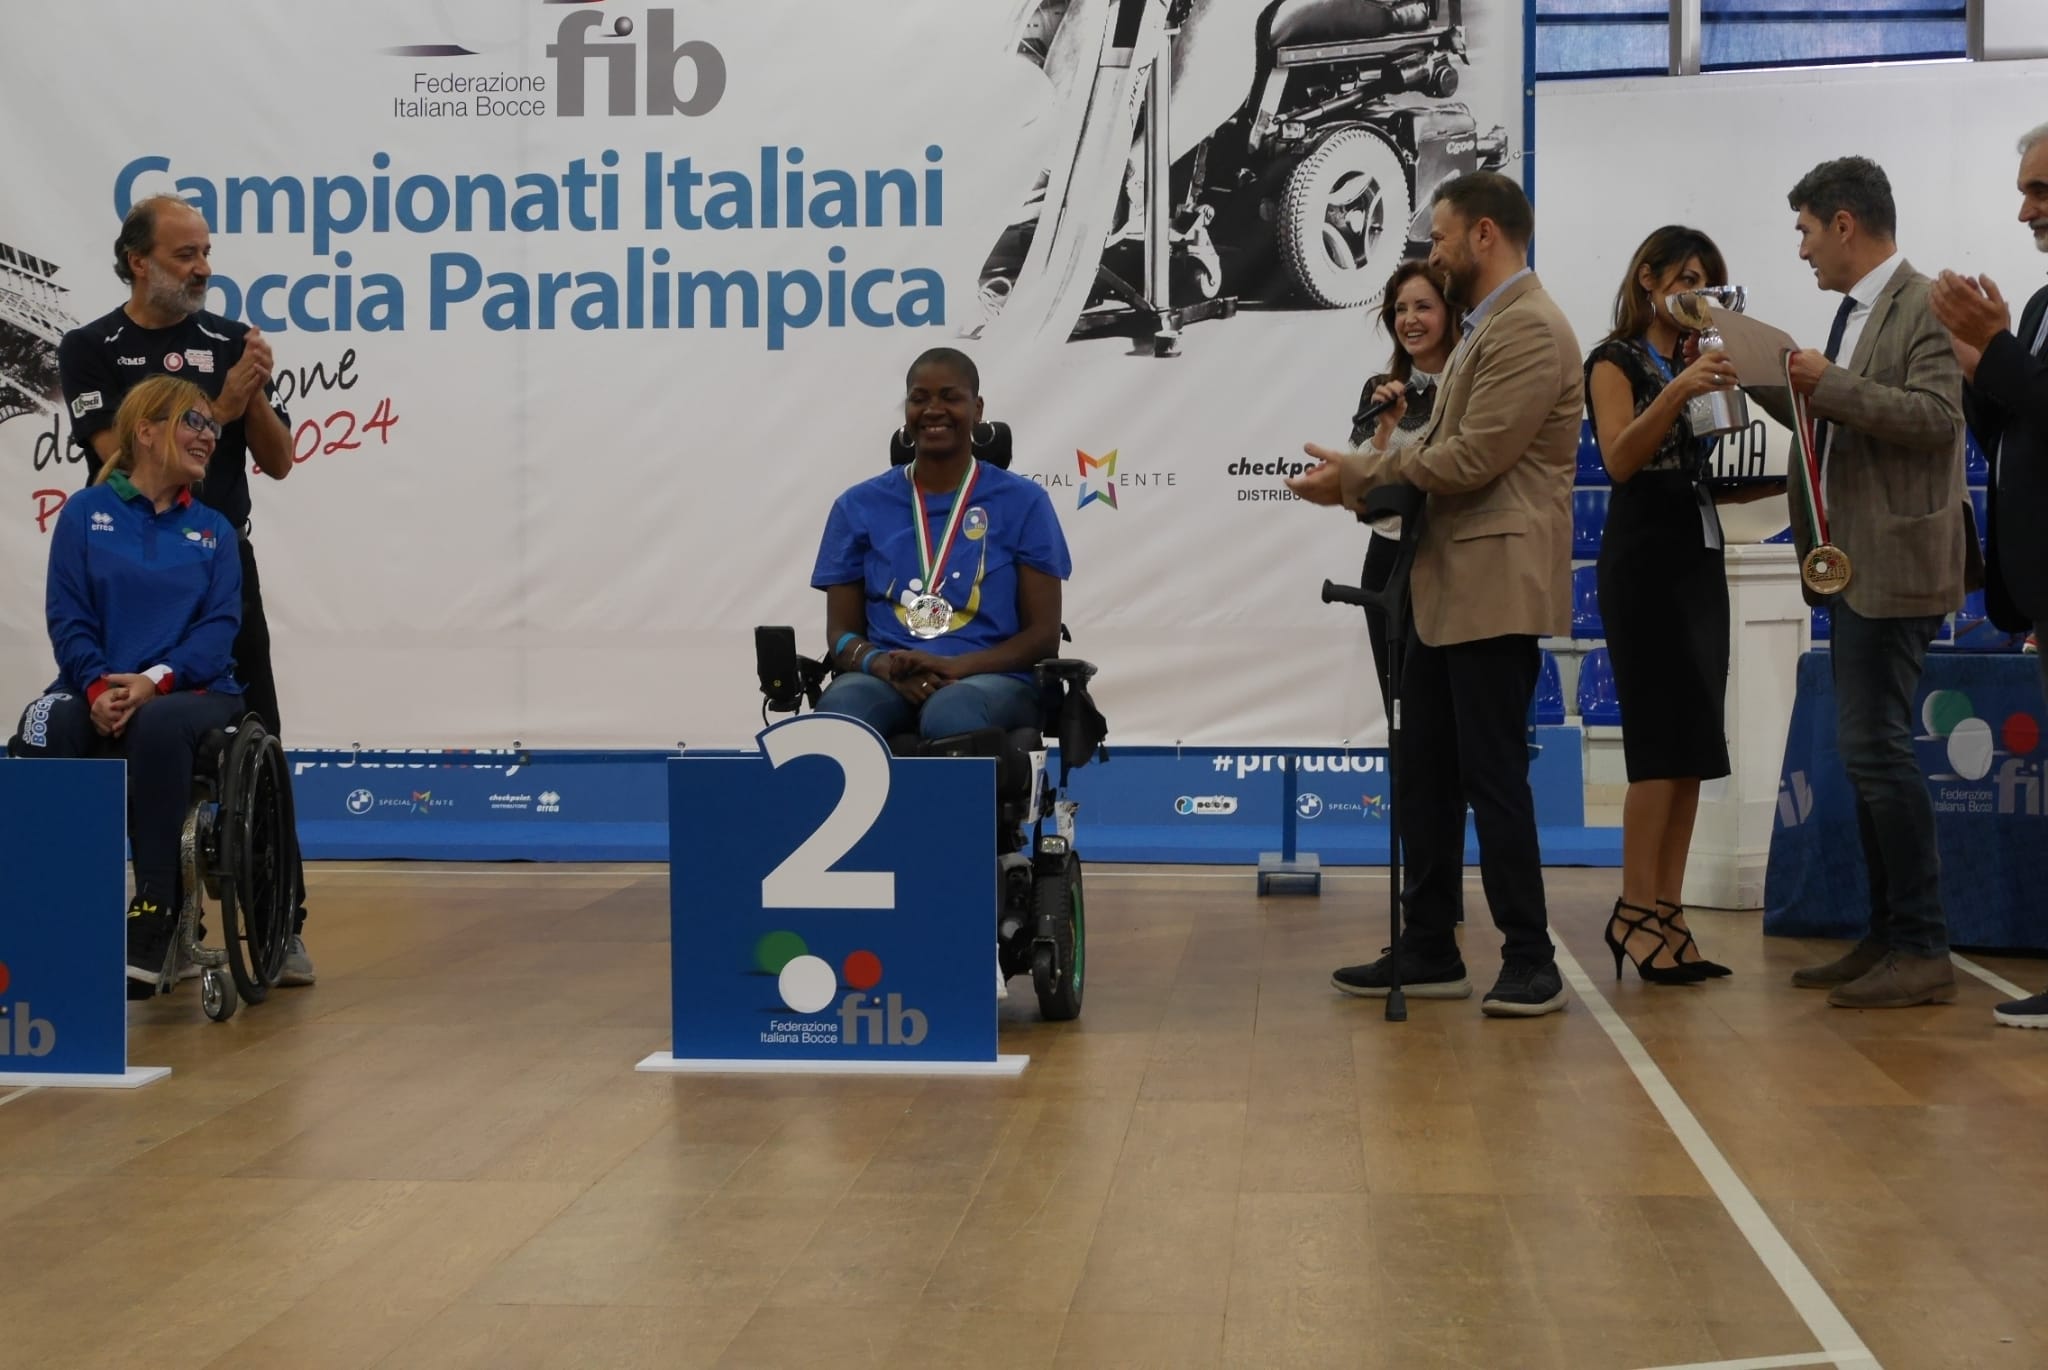 Spilimberghese Paralimpica 1